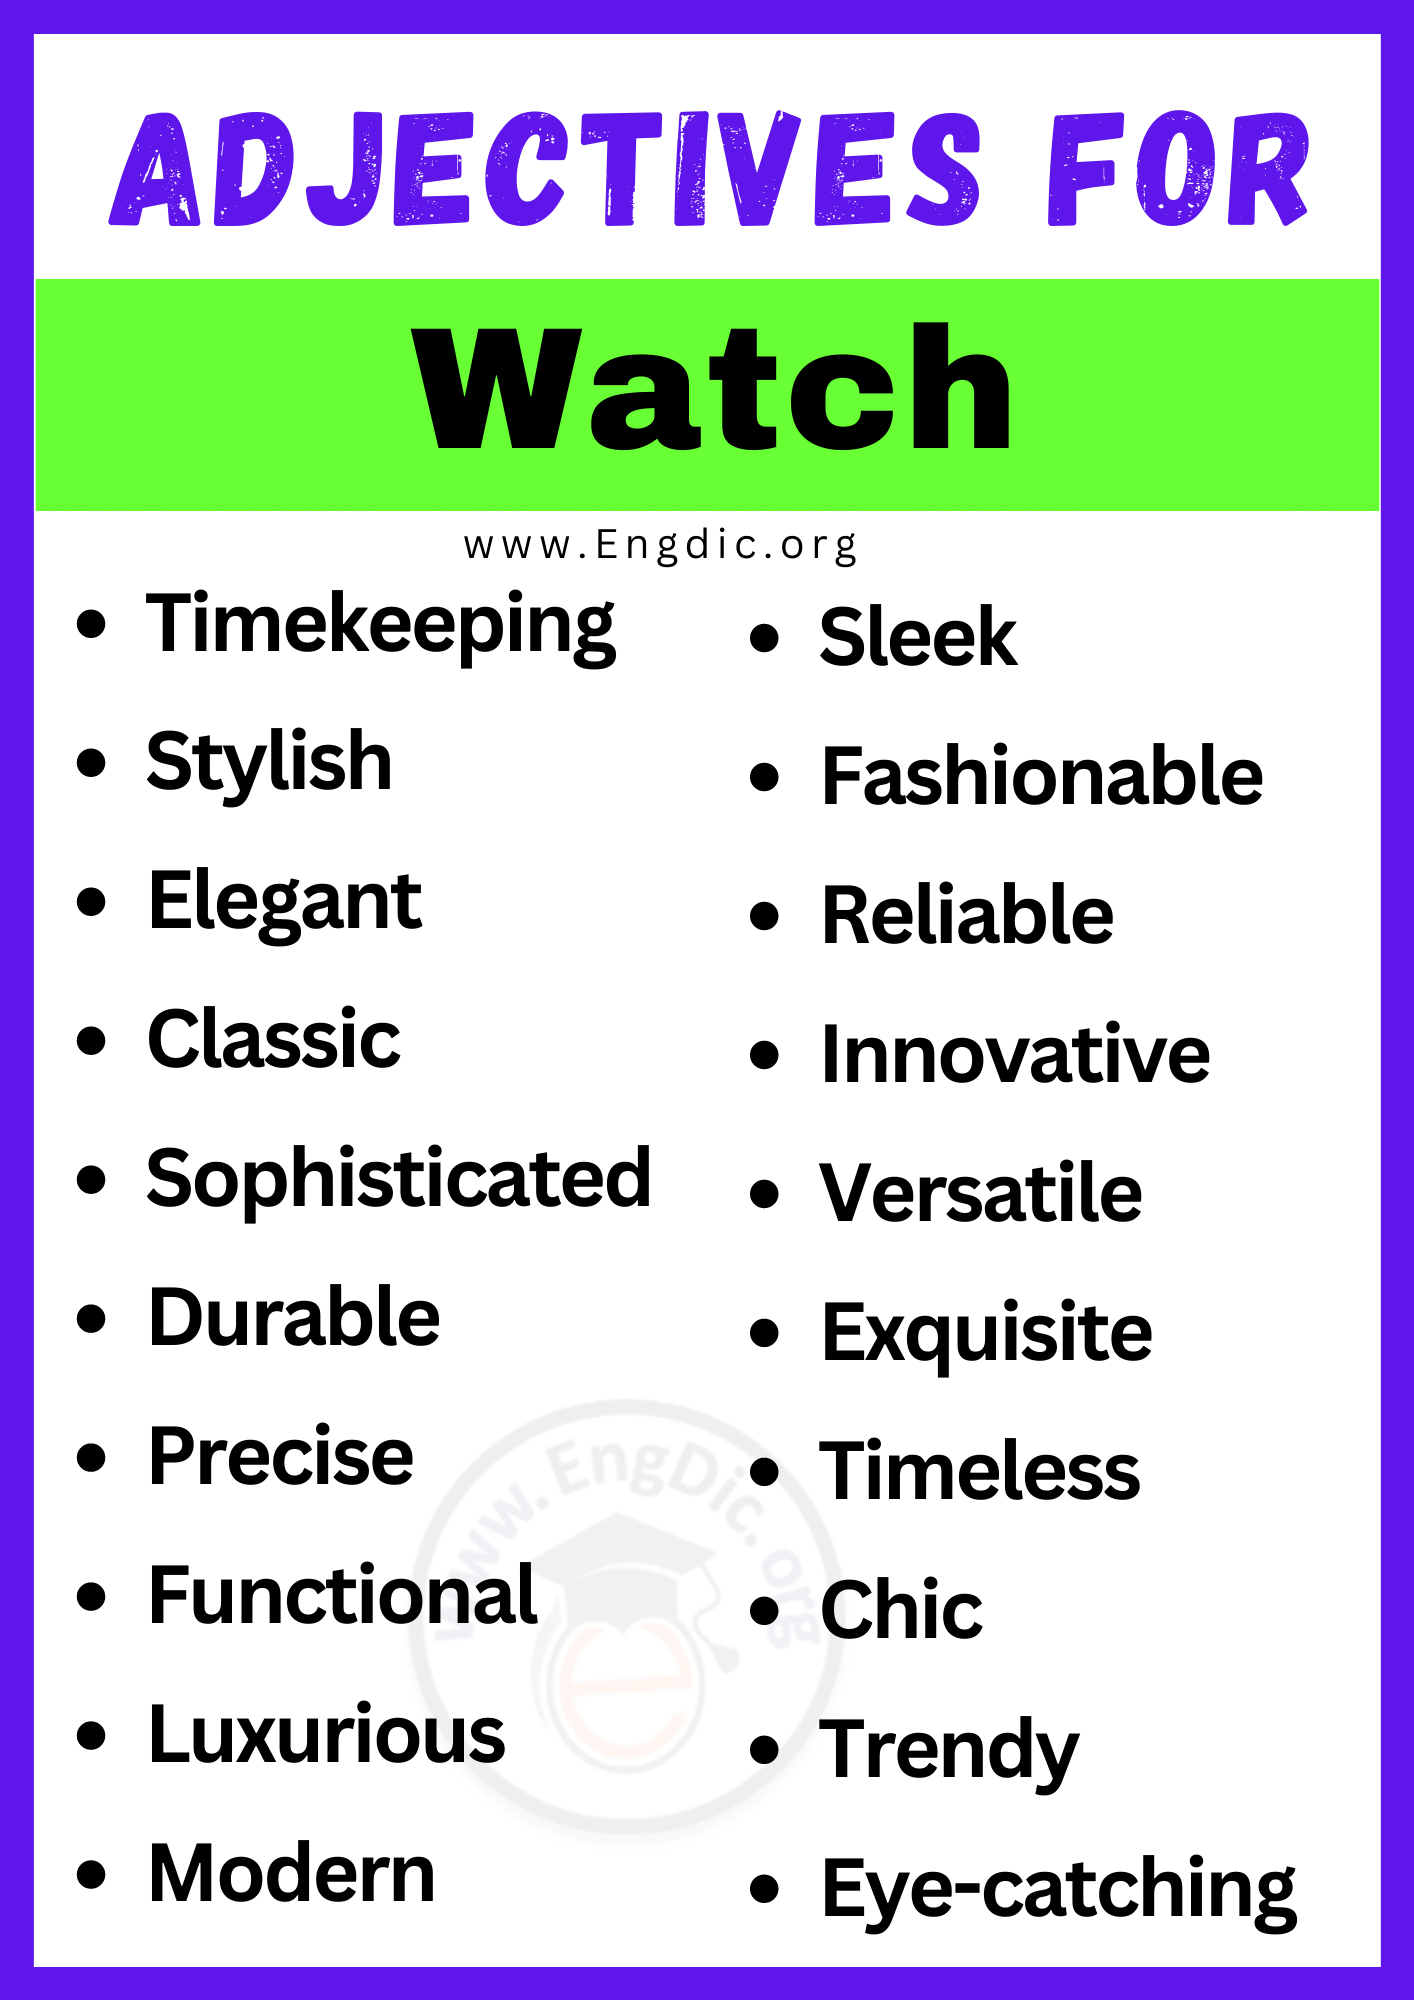 Adjectives for Watch